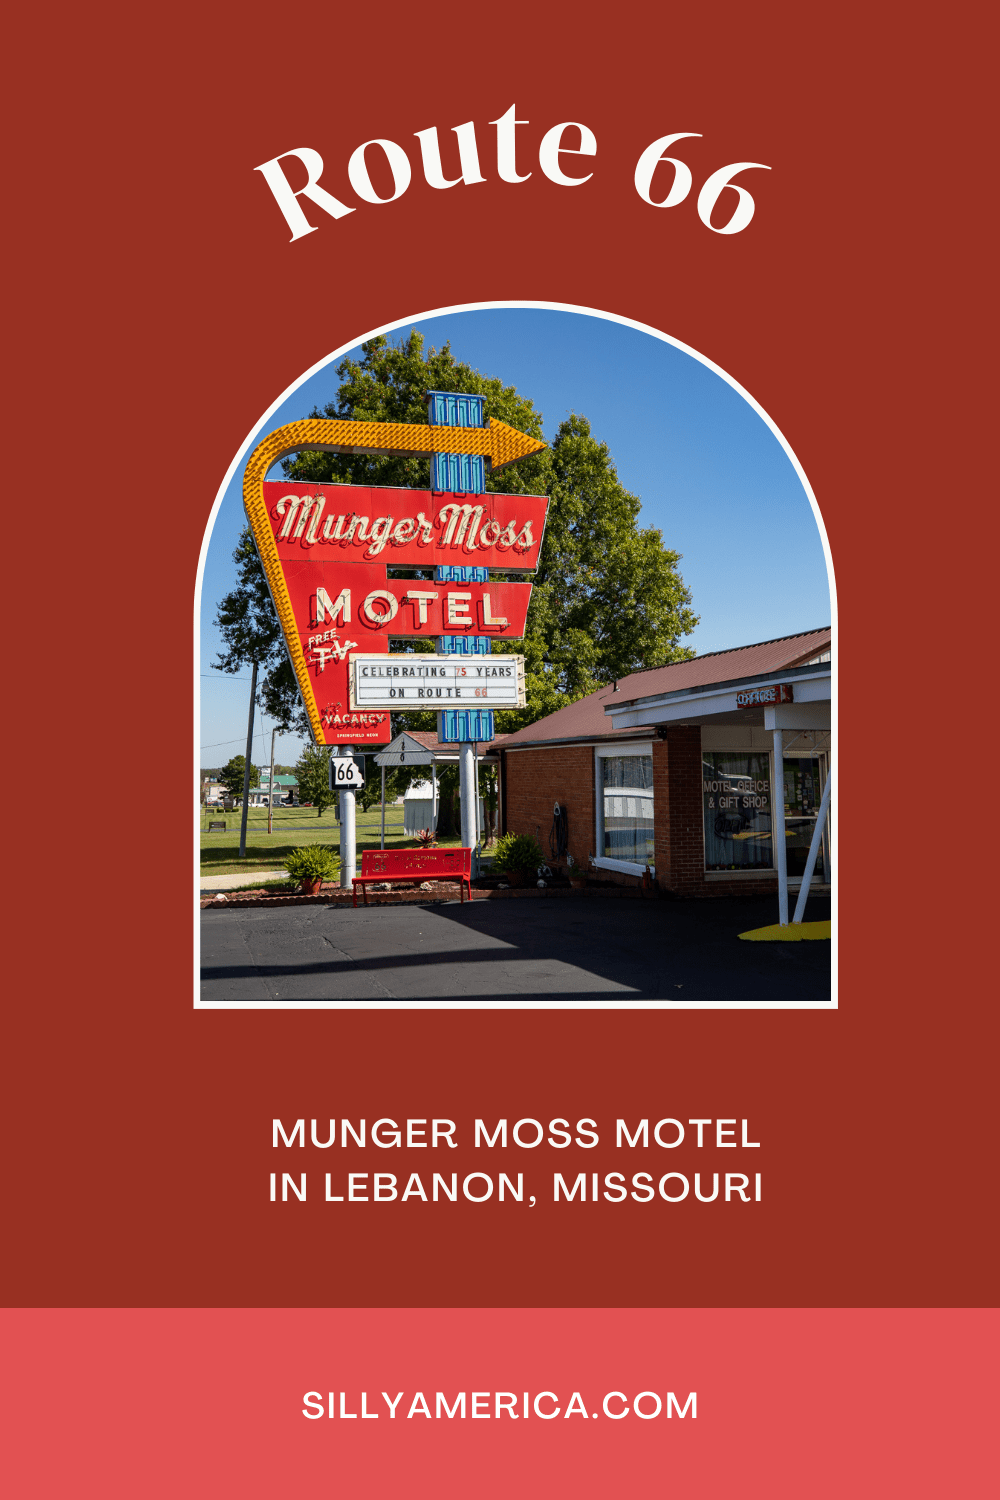 The Munger Moss Motel in Lebanon, Missouri was built in 1946 and you can still stay at this classic Route 66 motel on your Route 66 road trip.  #RoadTrips #RoadTripStop #Route66 #Route66RoadTrip #MissouriRoute66 #Missouri #MissouriRoadTrip #MissouriRoadsideAttractions #RoadsideAttractions #RoadsideAttraction #RoadsideAmerica #RoadTrip